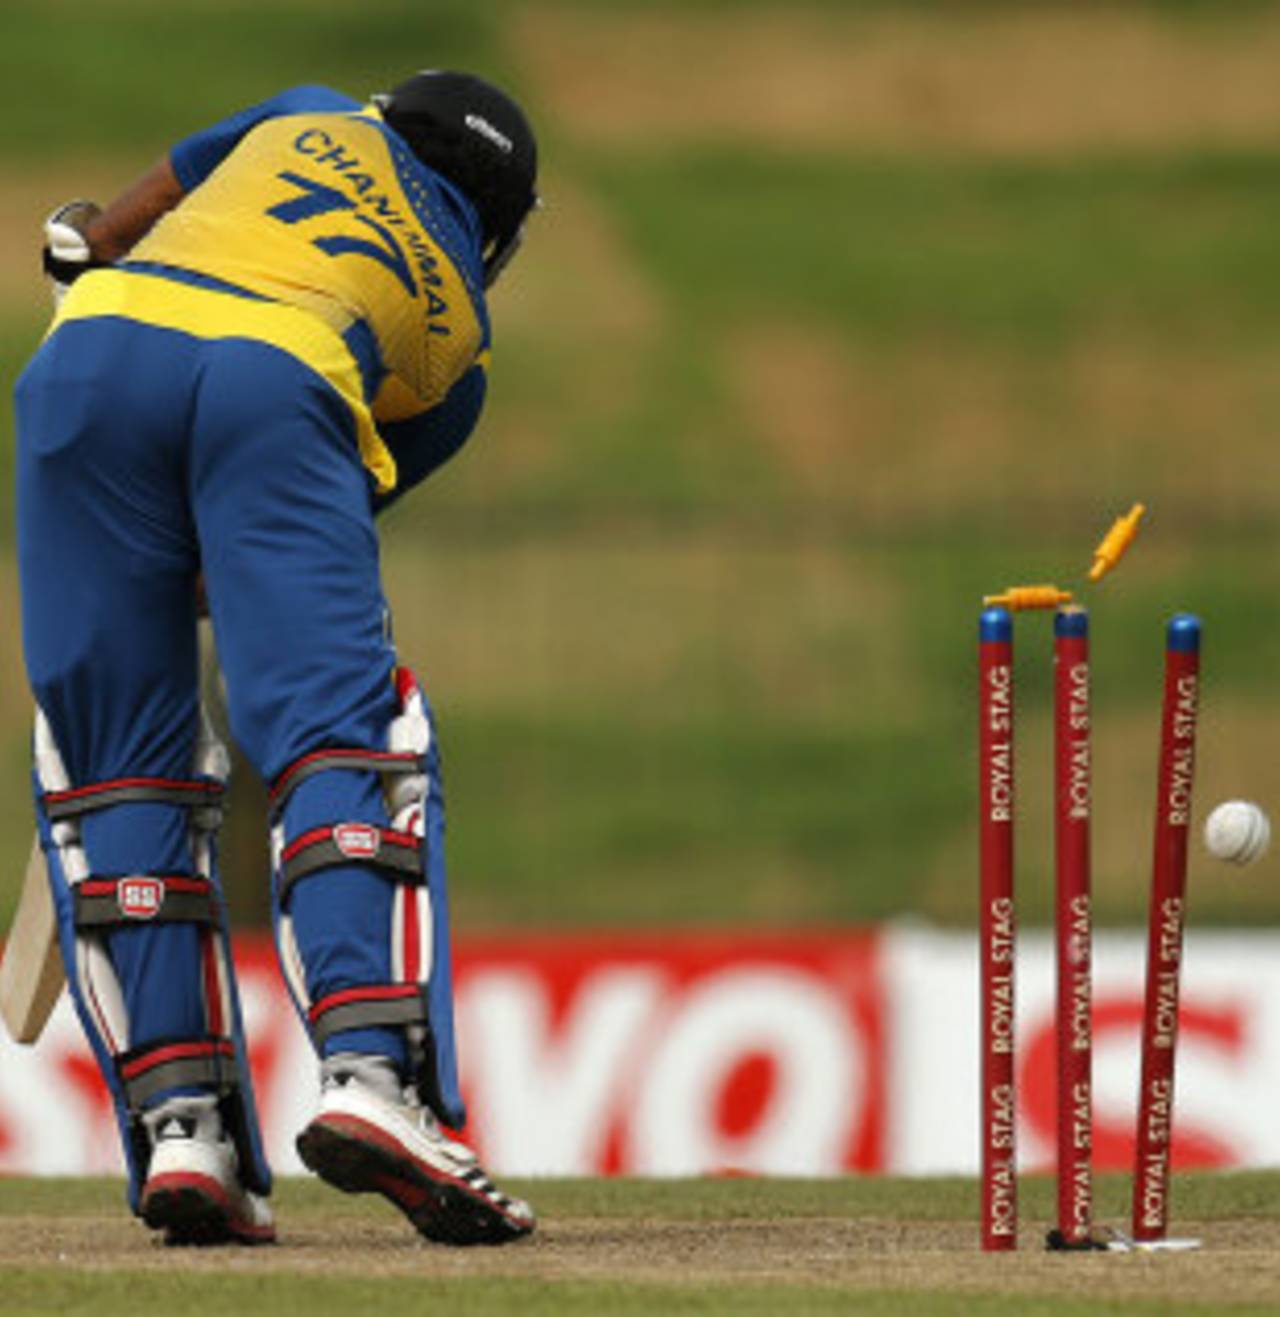 Tim Southee's ball to dismiss Dinesh Chandimal may well be one of the finest he has bowled&nbsp;&nbsp;&bull;&nbsp;&nbsp;Associated Press